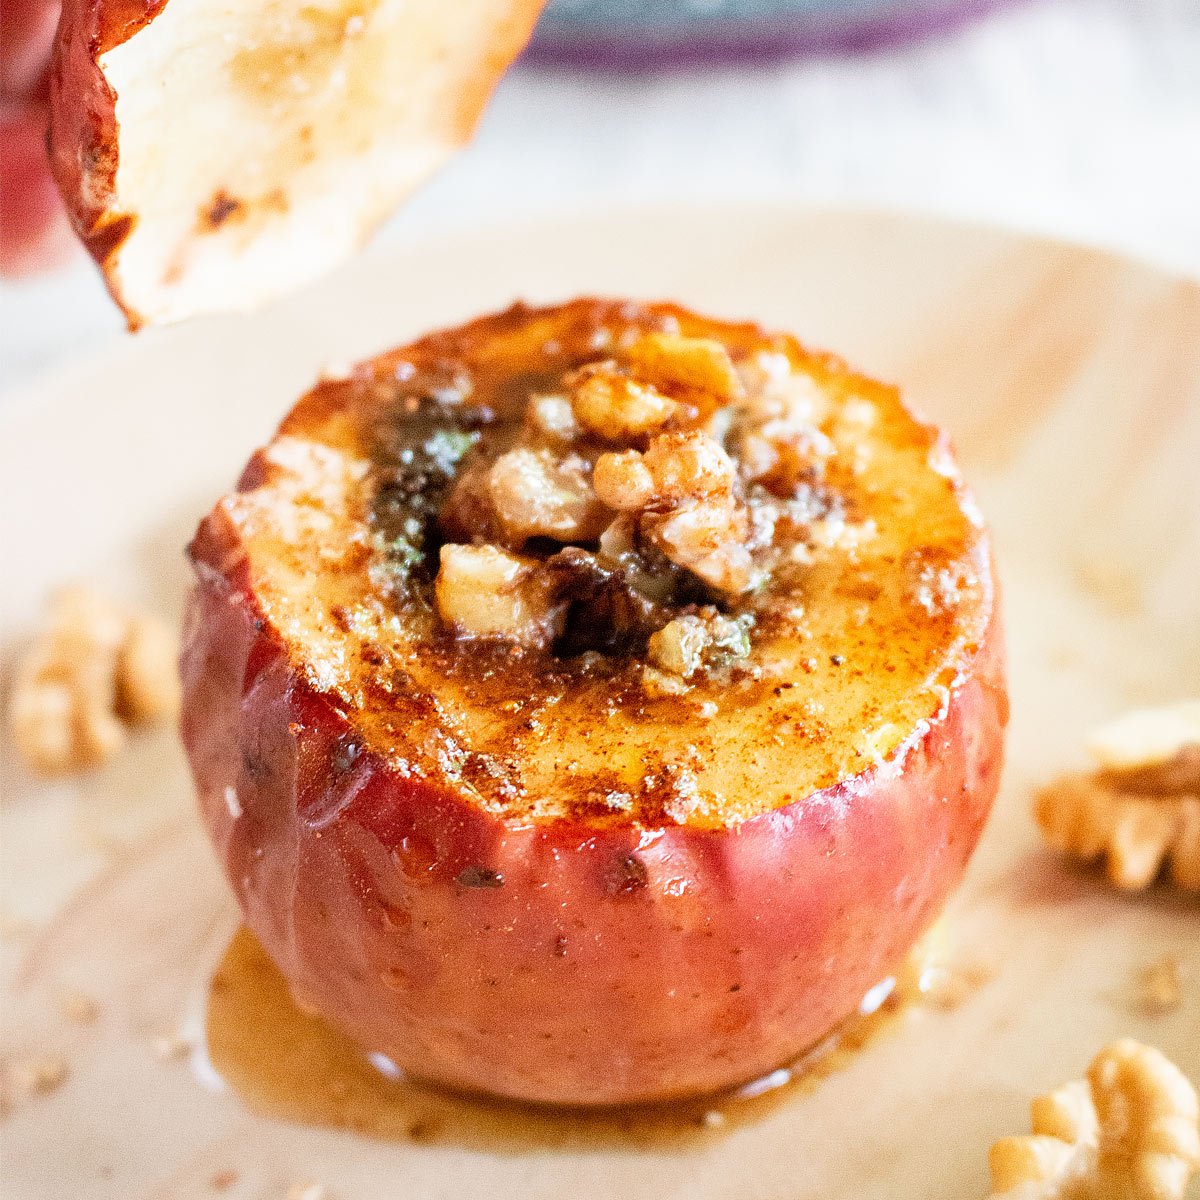 Stuffed Baked Apples with Walnuts [+Video]